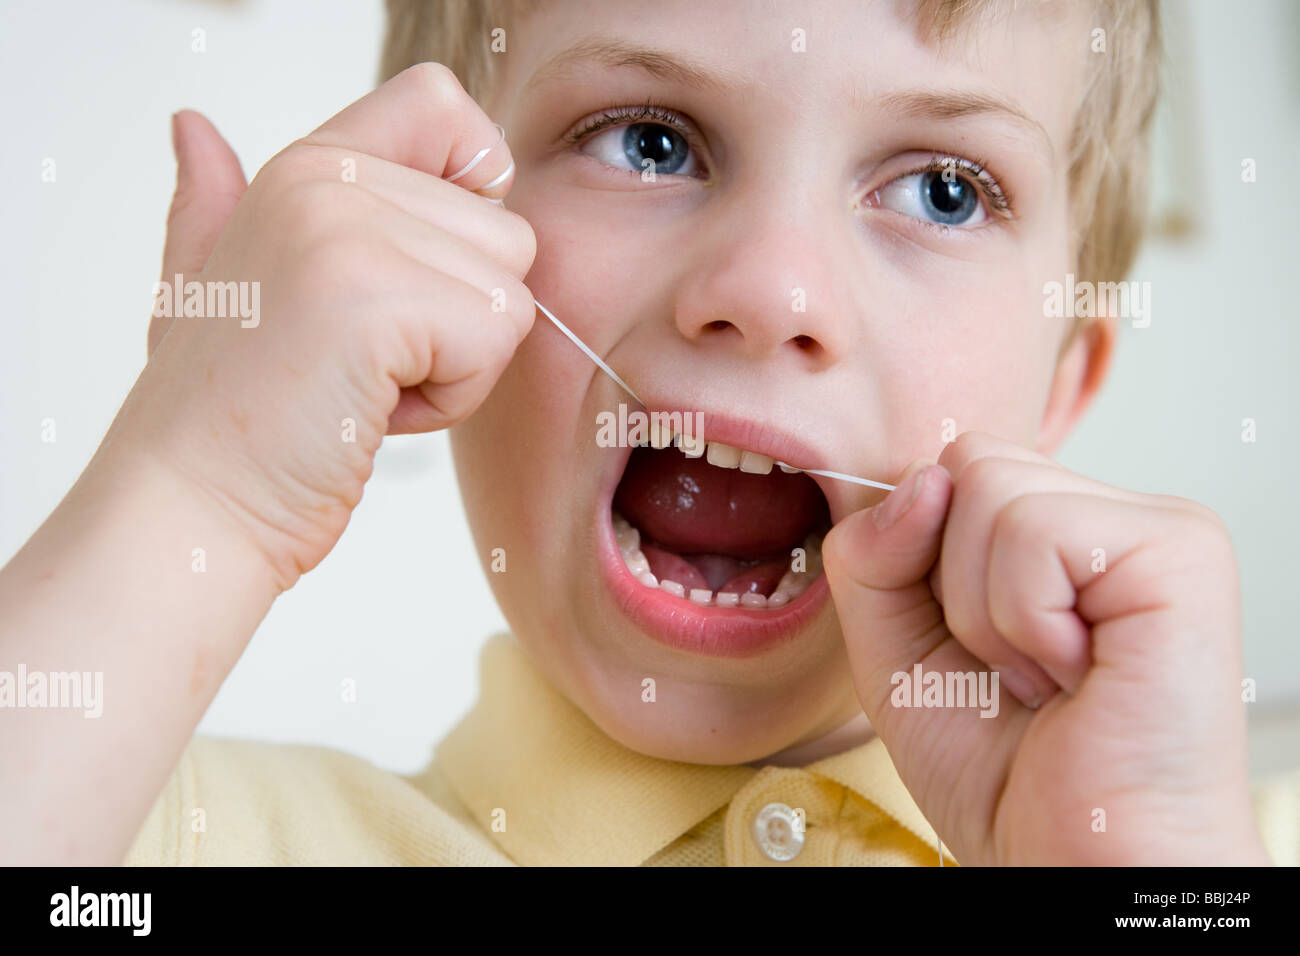 A small boy using Dental floss to care for teeth and gums Stock Photo